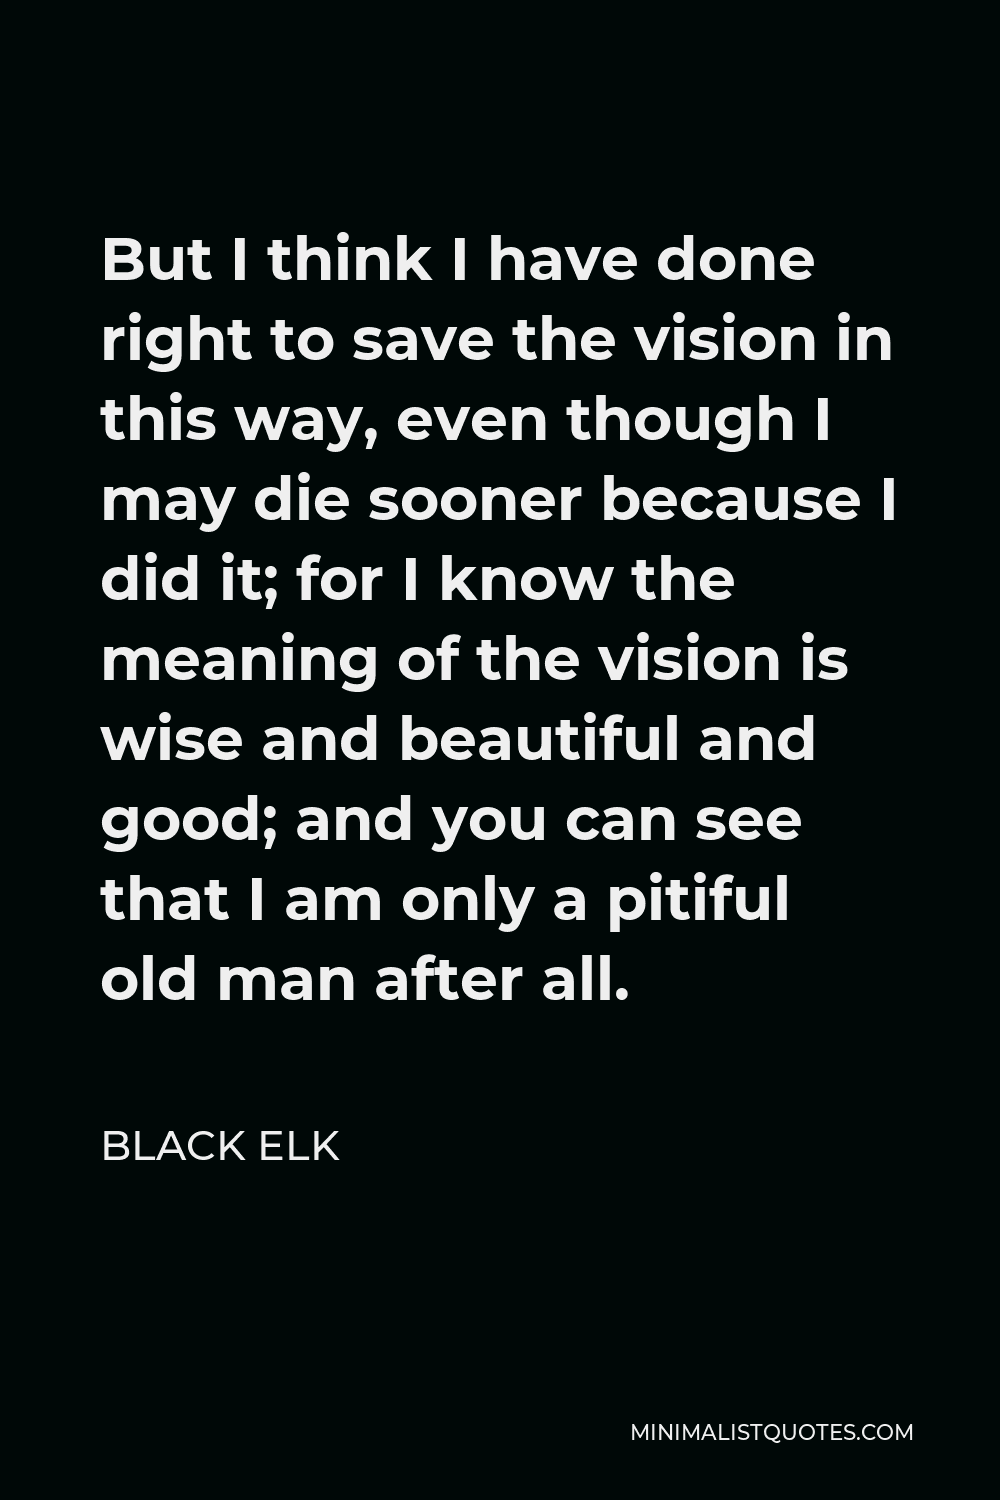 Black Elk Quote - But I think I have done right to save the vision in this way, even though I may die sooner because I did it; for I know the meaning of the vision is wise and beautiful and good; and you can see that I am only a pitiful old man after all.